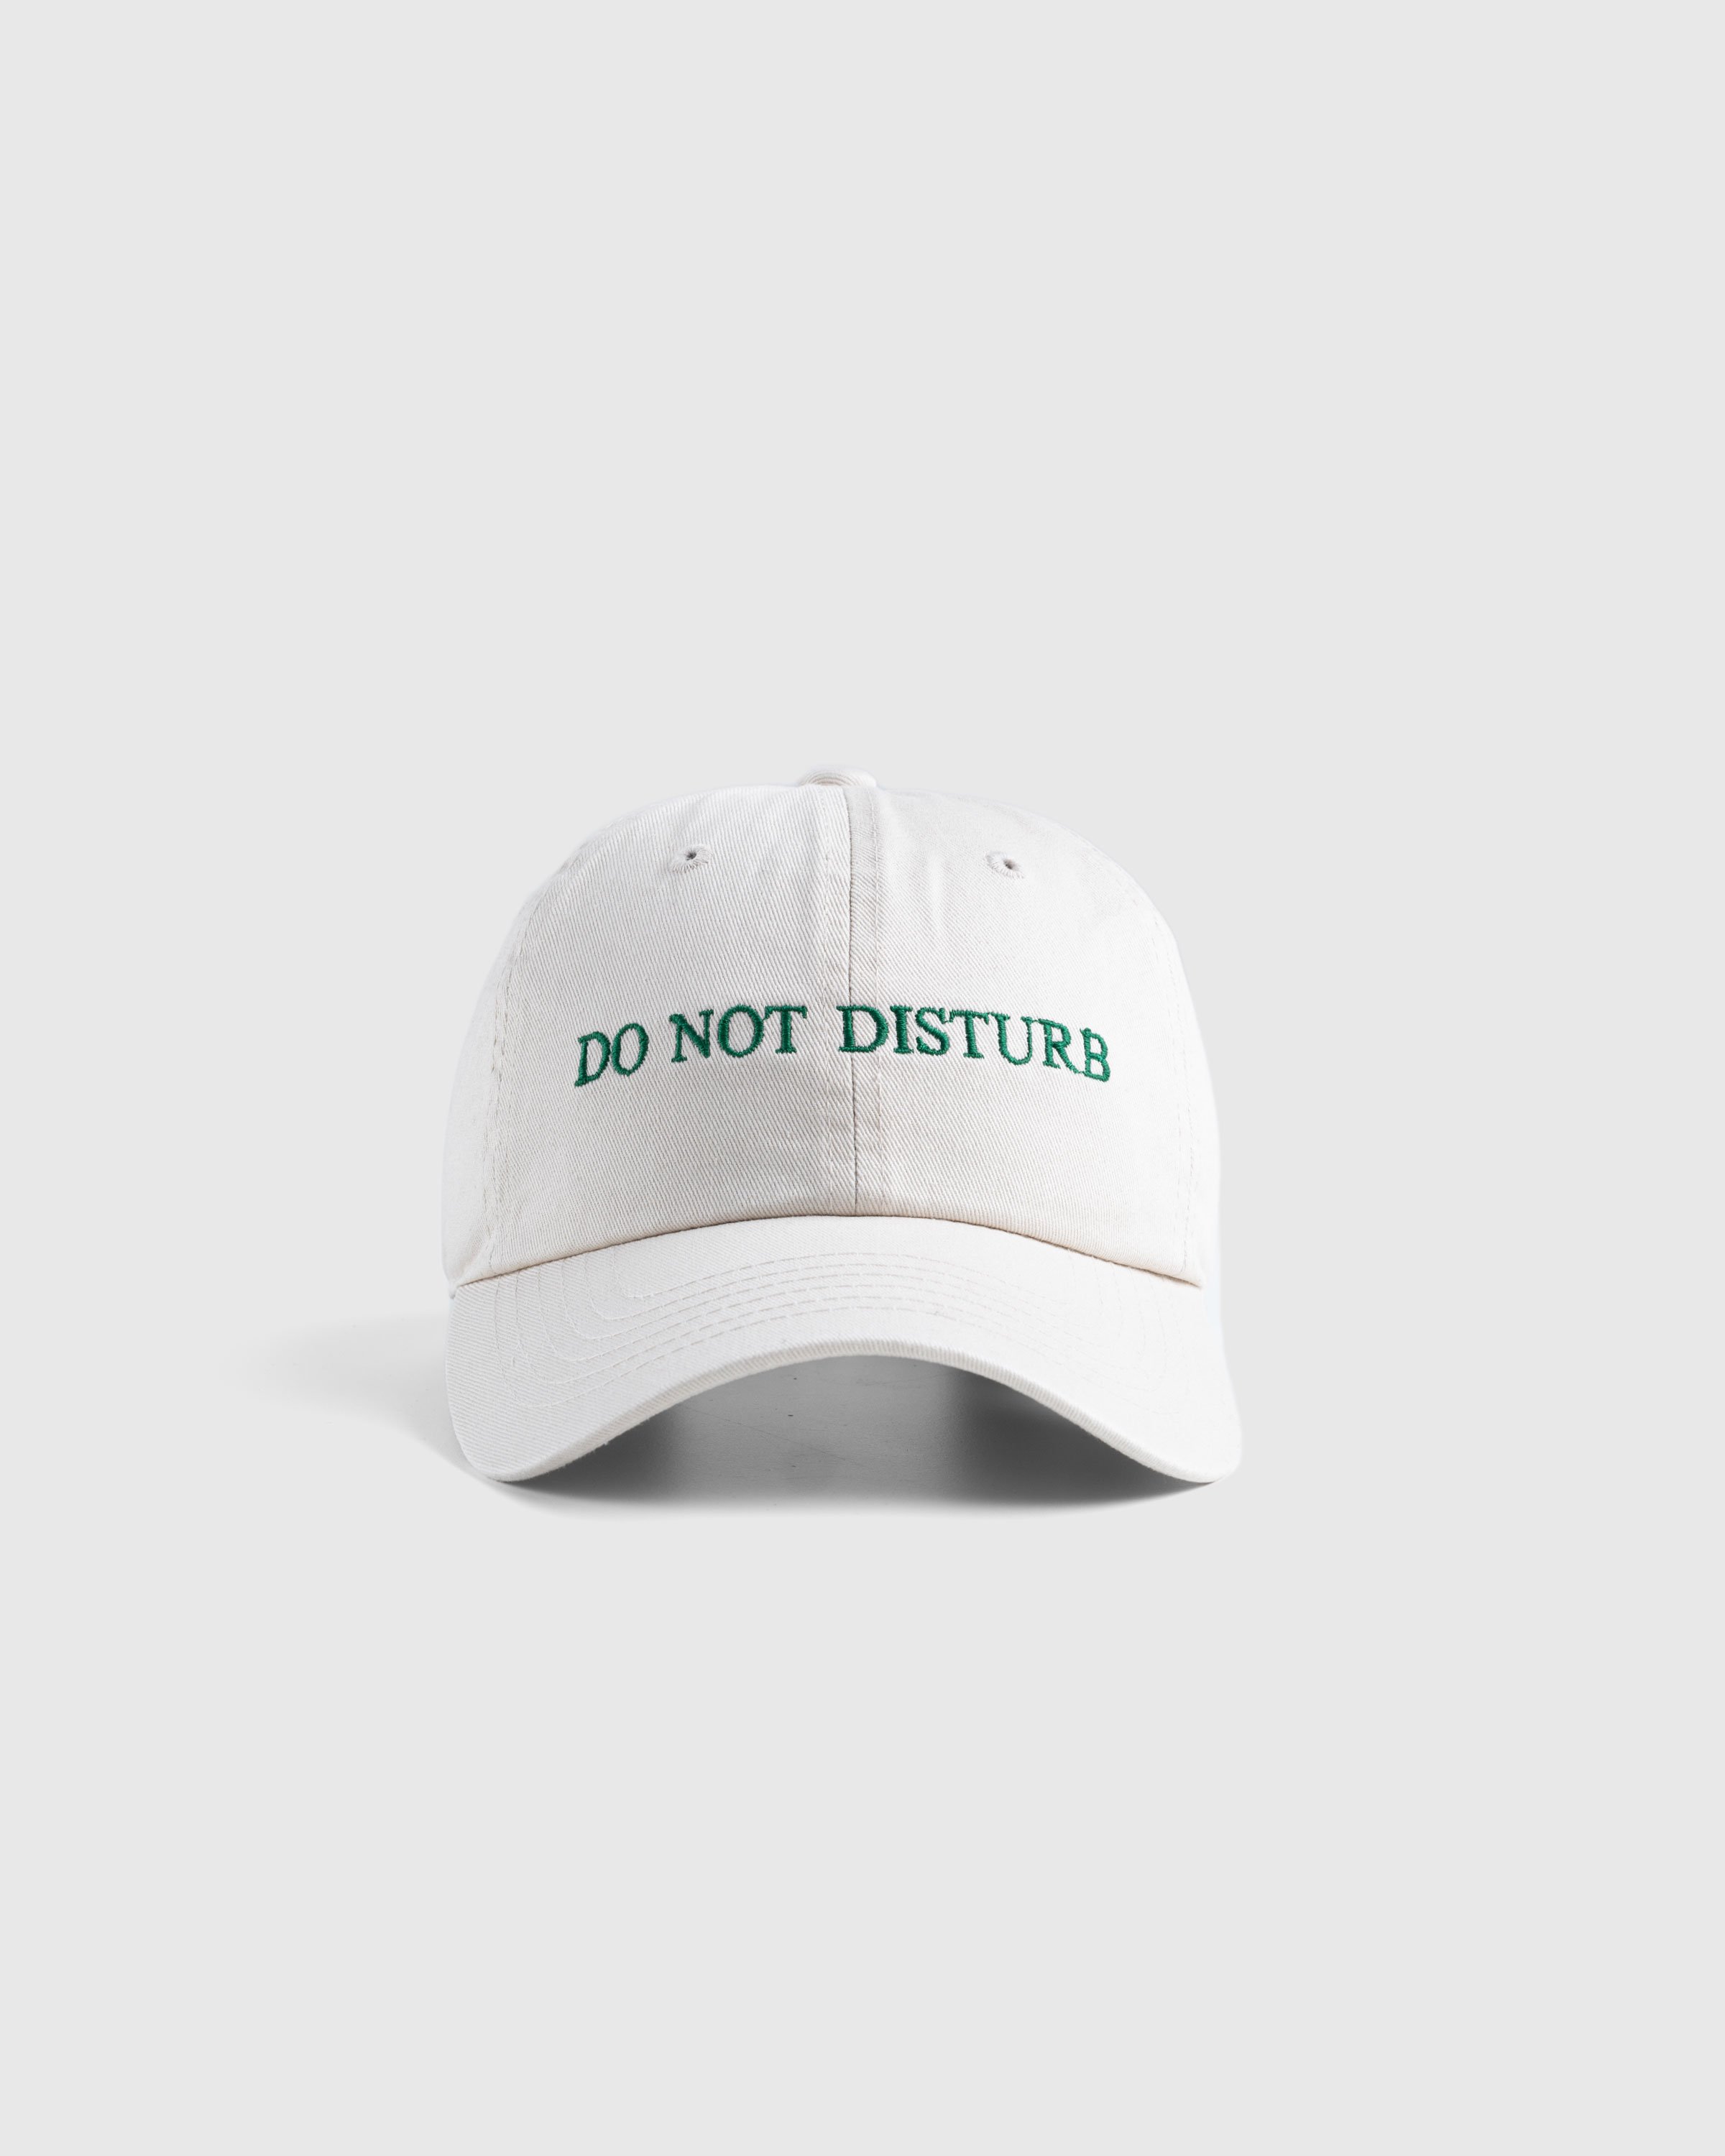 HO HO COCO - DO NOT DISTURB KHAKI X FOREST - Accessories - Green - Image 2